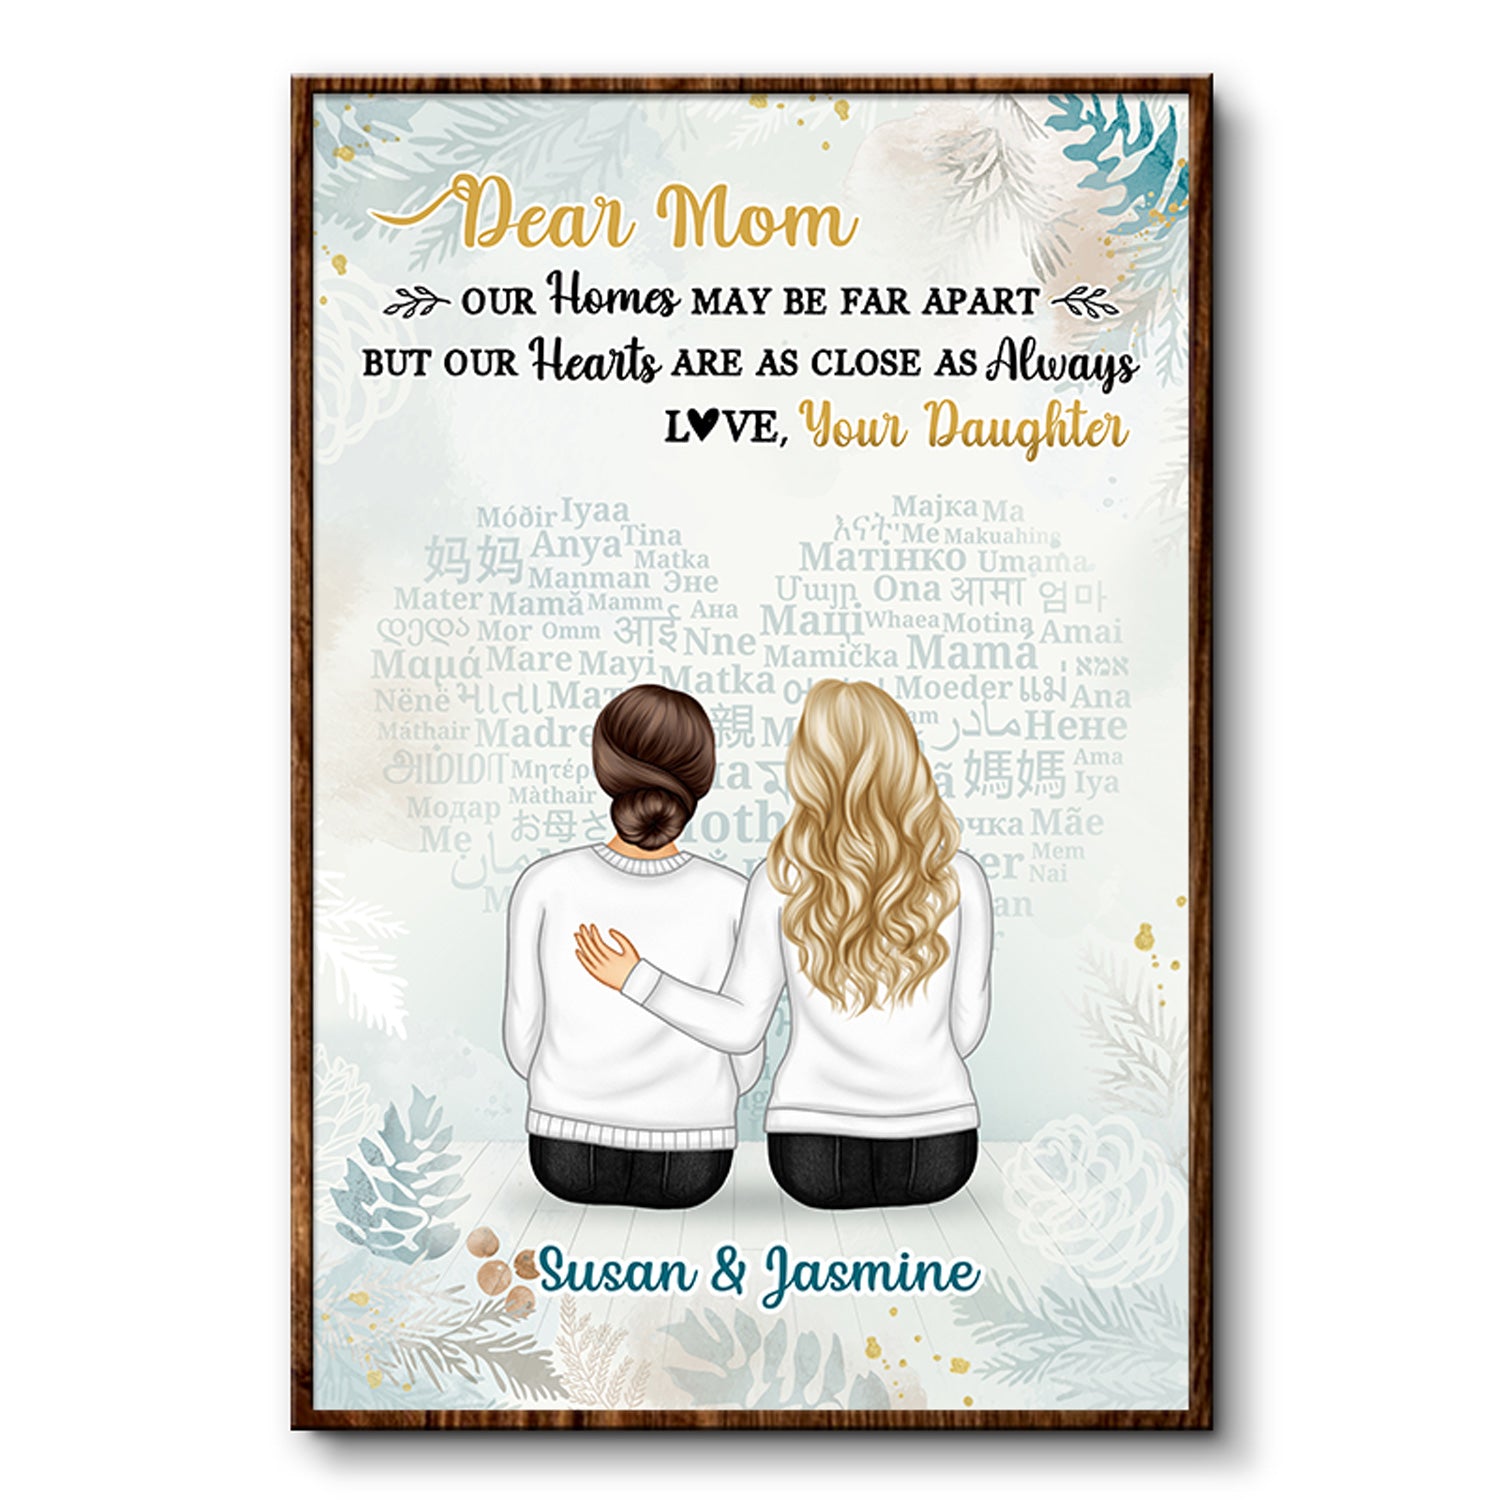 As Close As Always Gift For Grandparents And Parents - Personalized Custom Poster